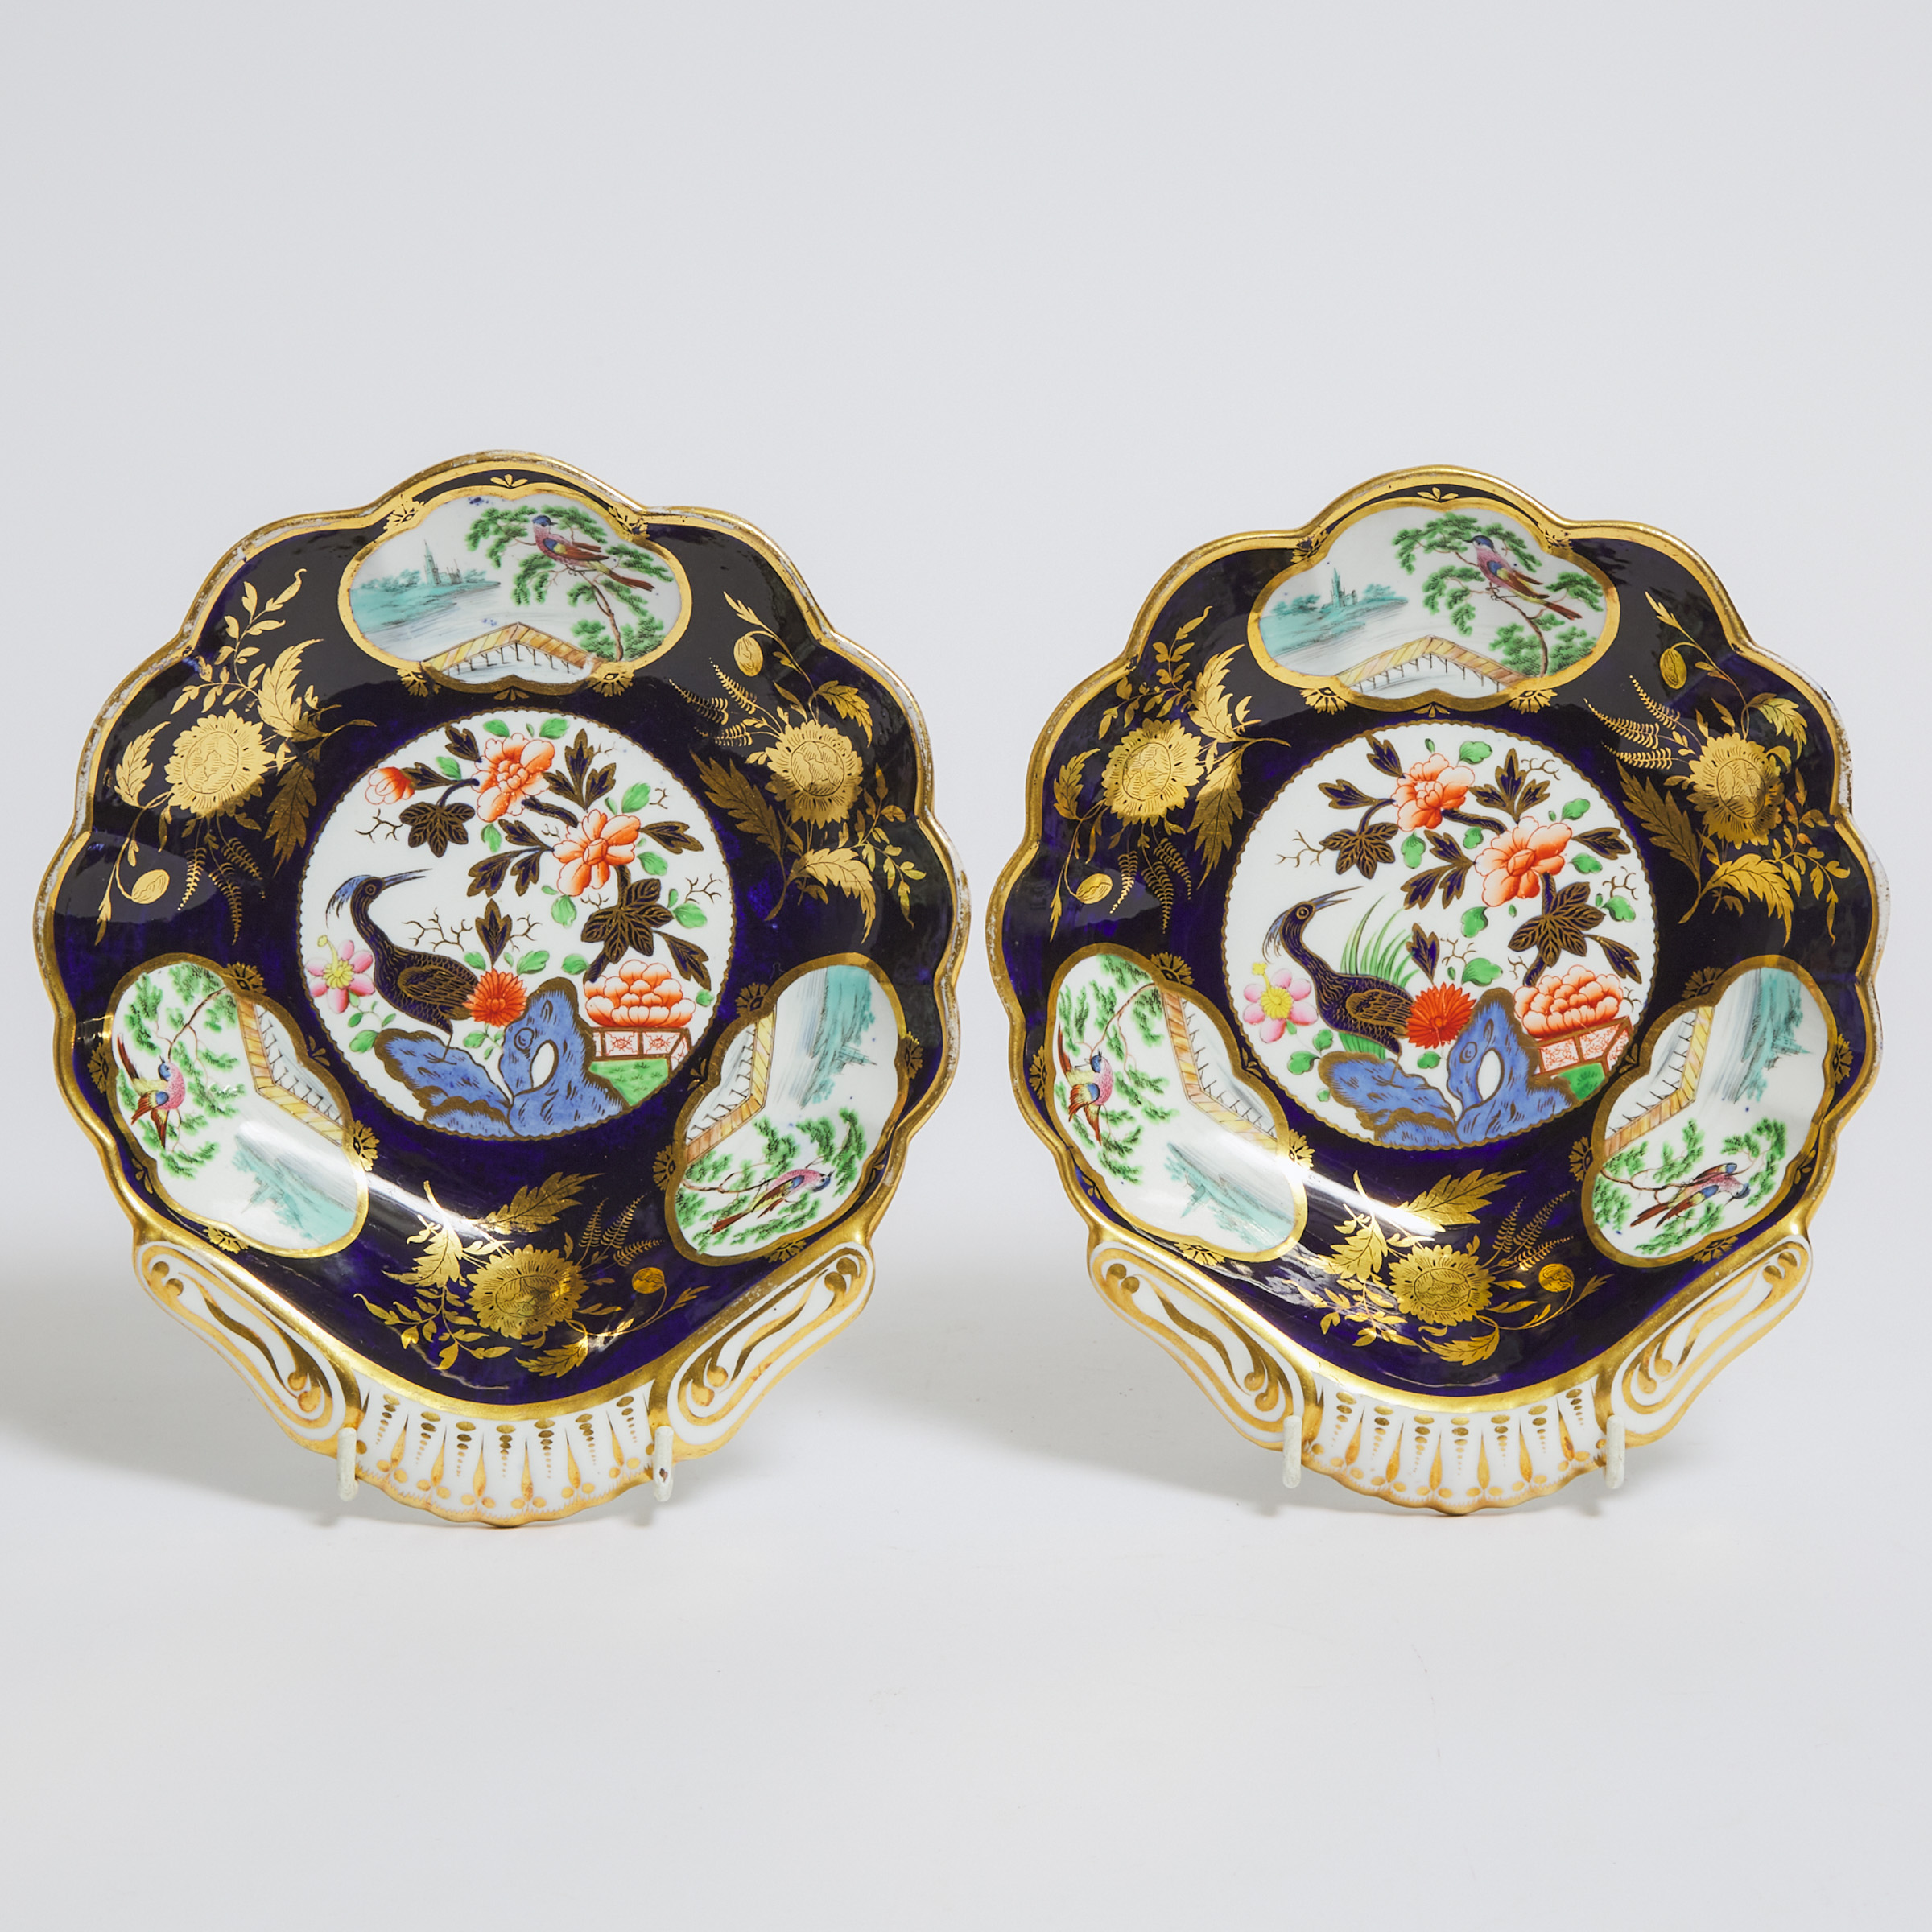 Pair of Spode Shell Form Dishes, c.1825